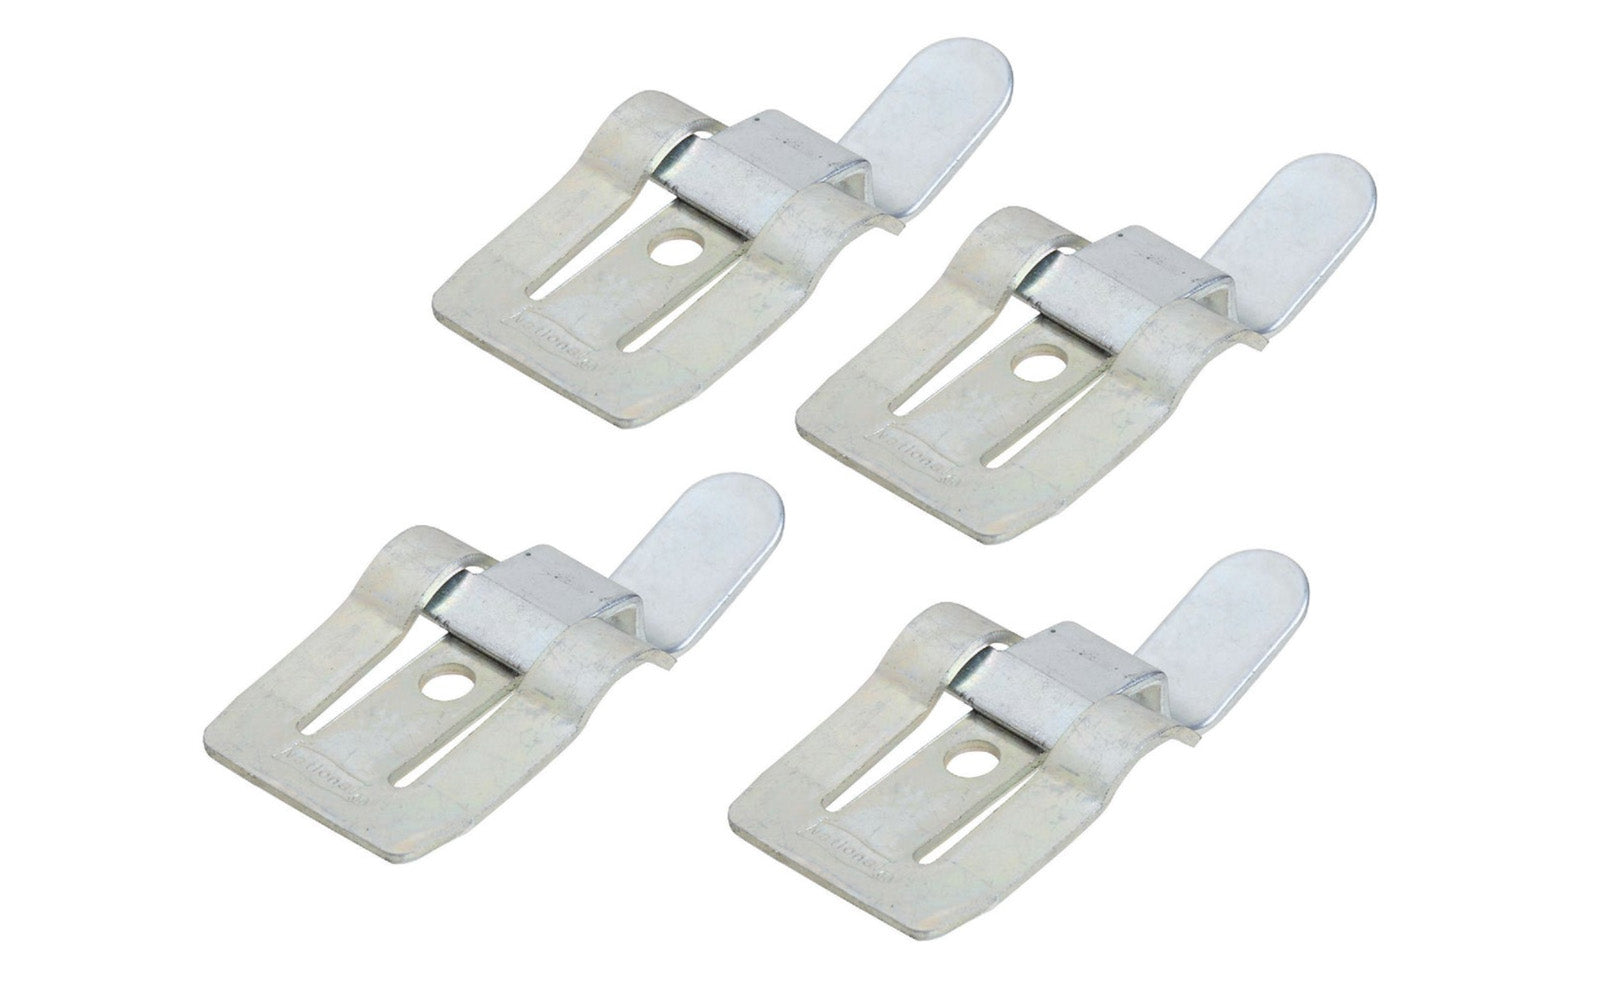 Zinc-Plated Steel Snap Fasteners. Spring steel base, cold-rolled steel center piece. Makes window removal easy. Will not damage painted surfaces. Sold as a 4 pack. N192-179. 038613192171